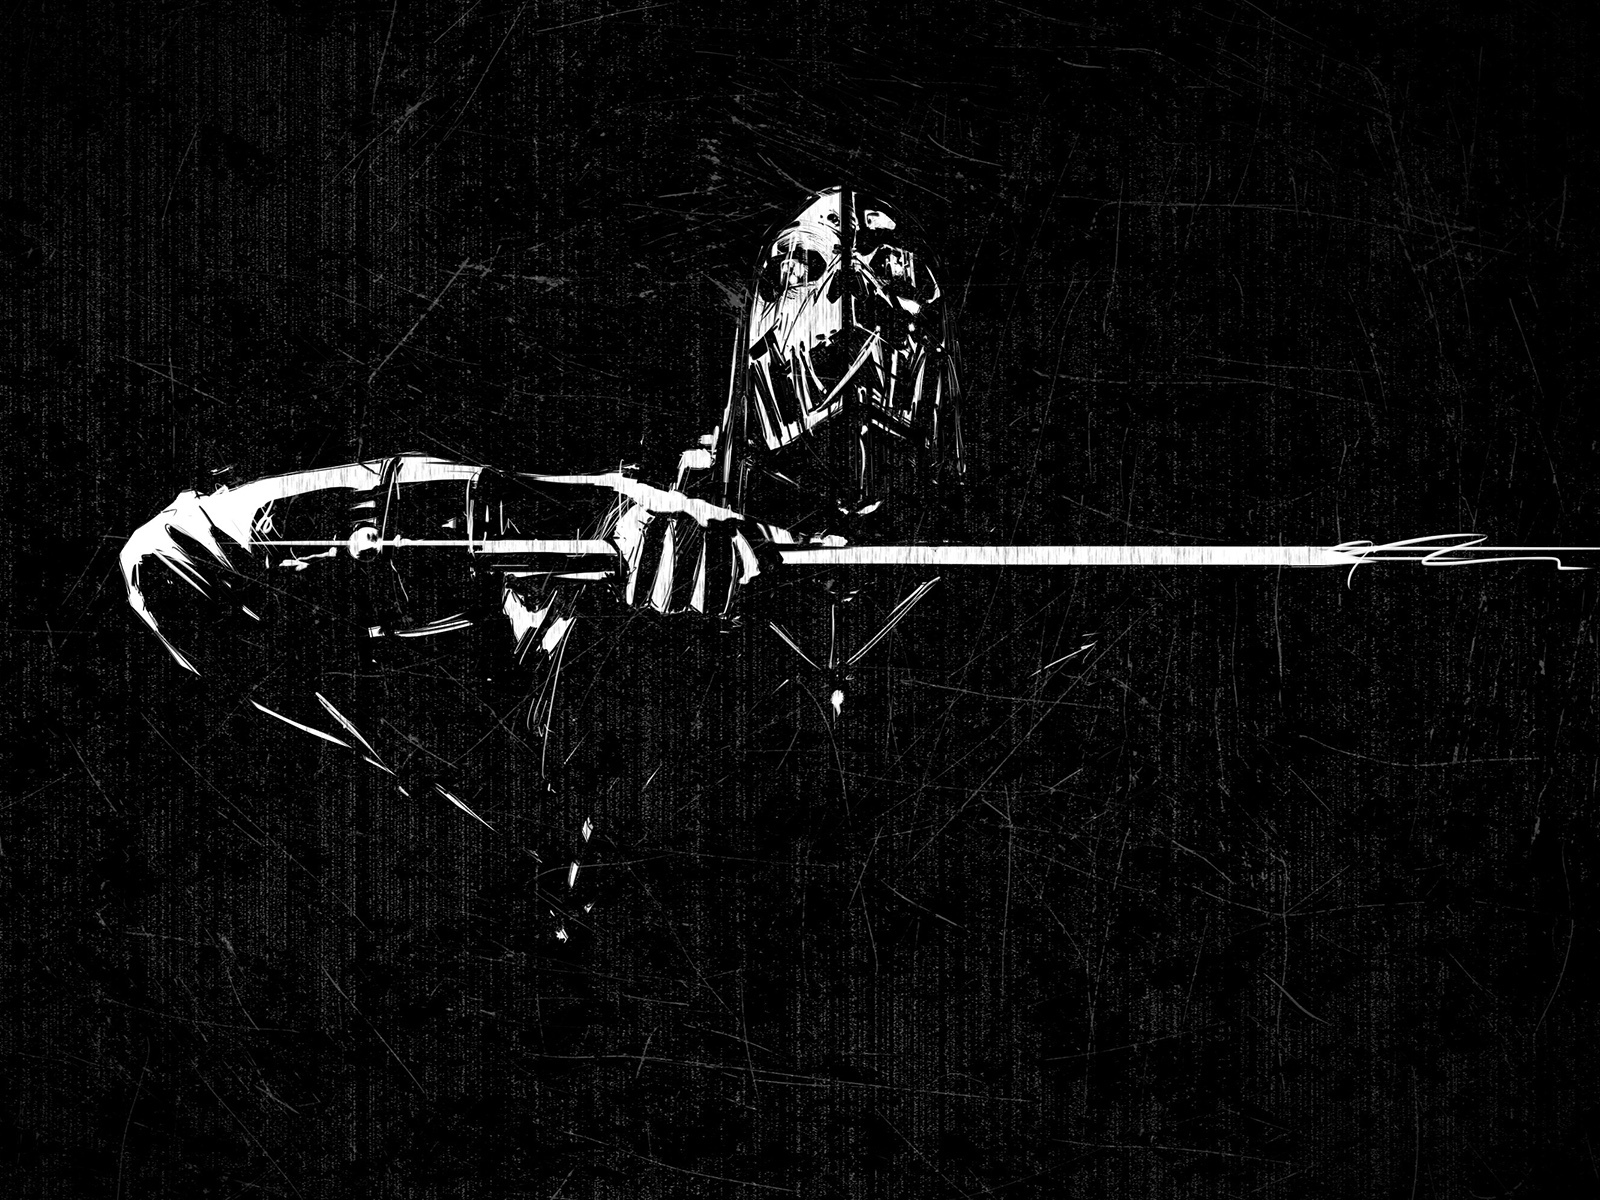 Dishonored Scraped Minimal for 1600 x 1200 resolution